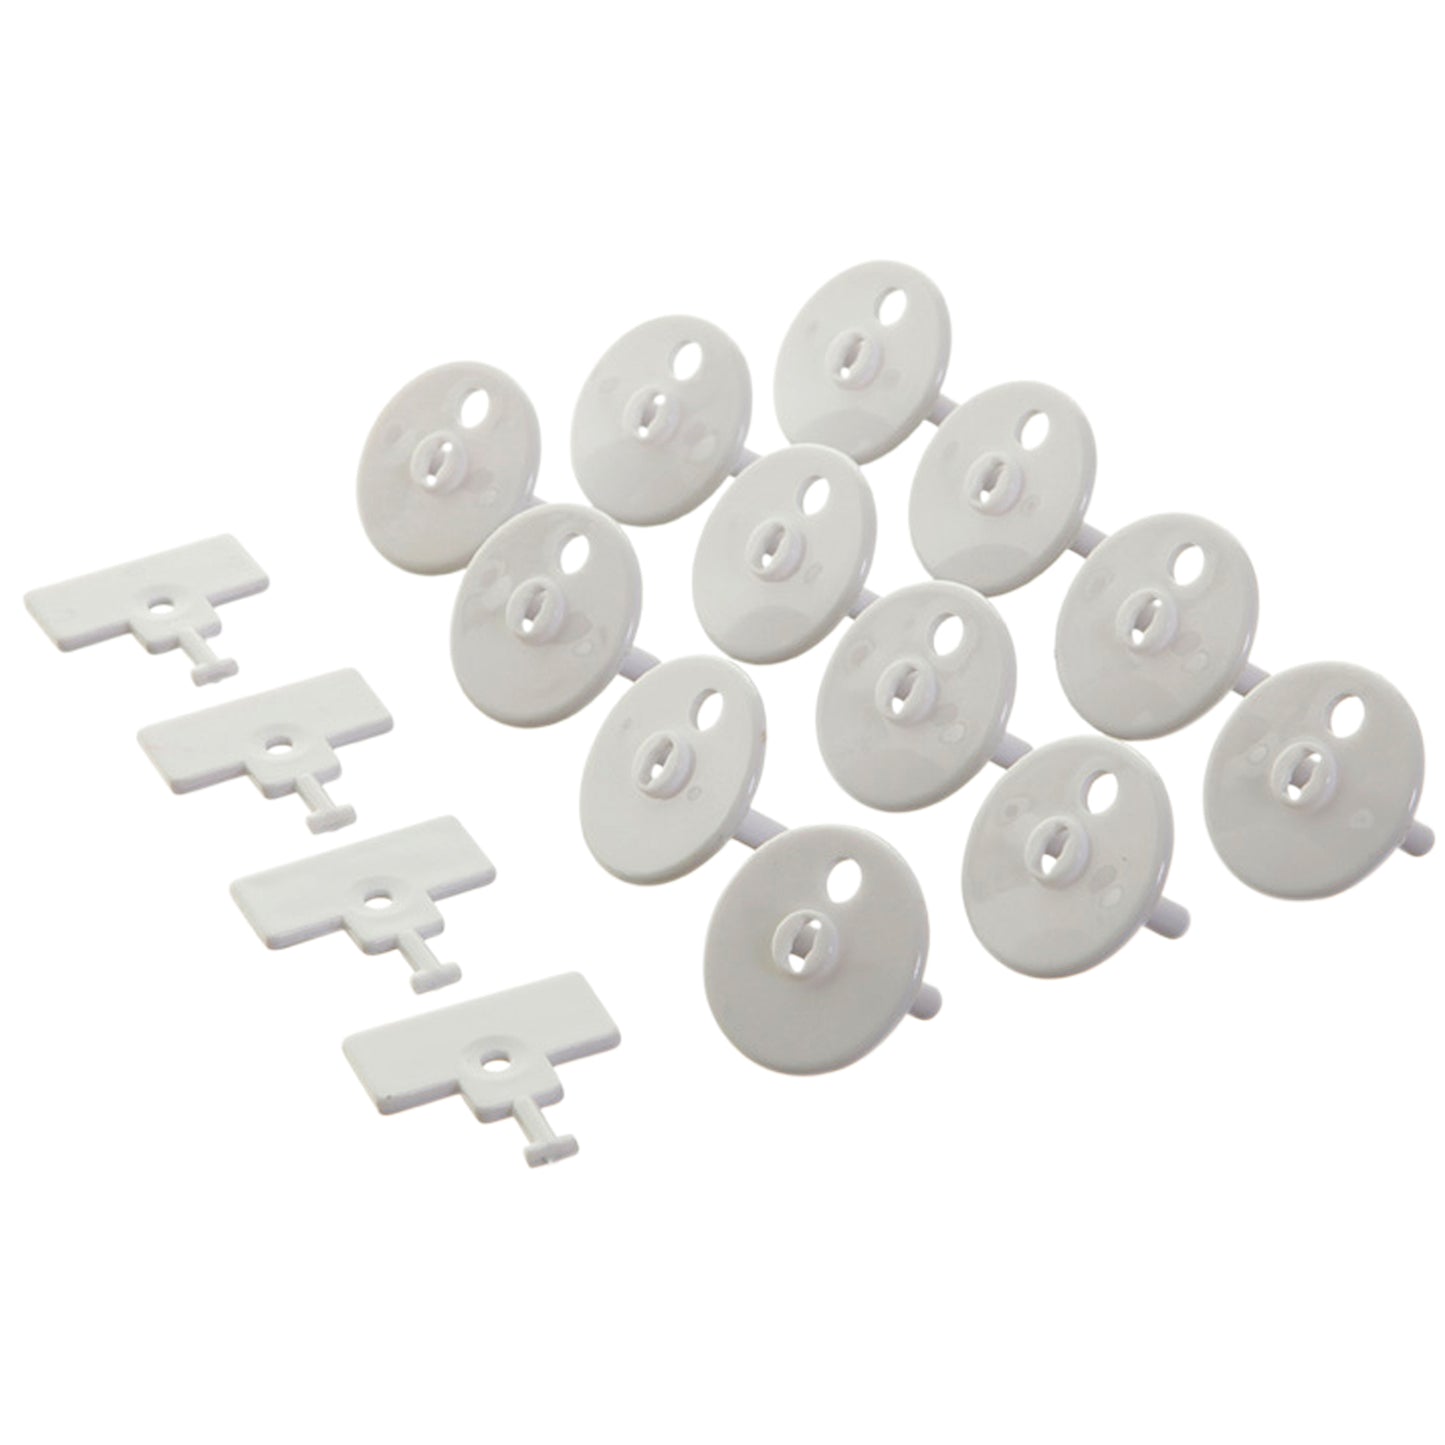 5 Amp Outlet Plug Point~12 Pack